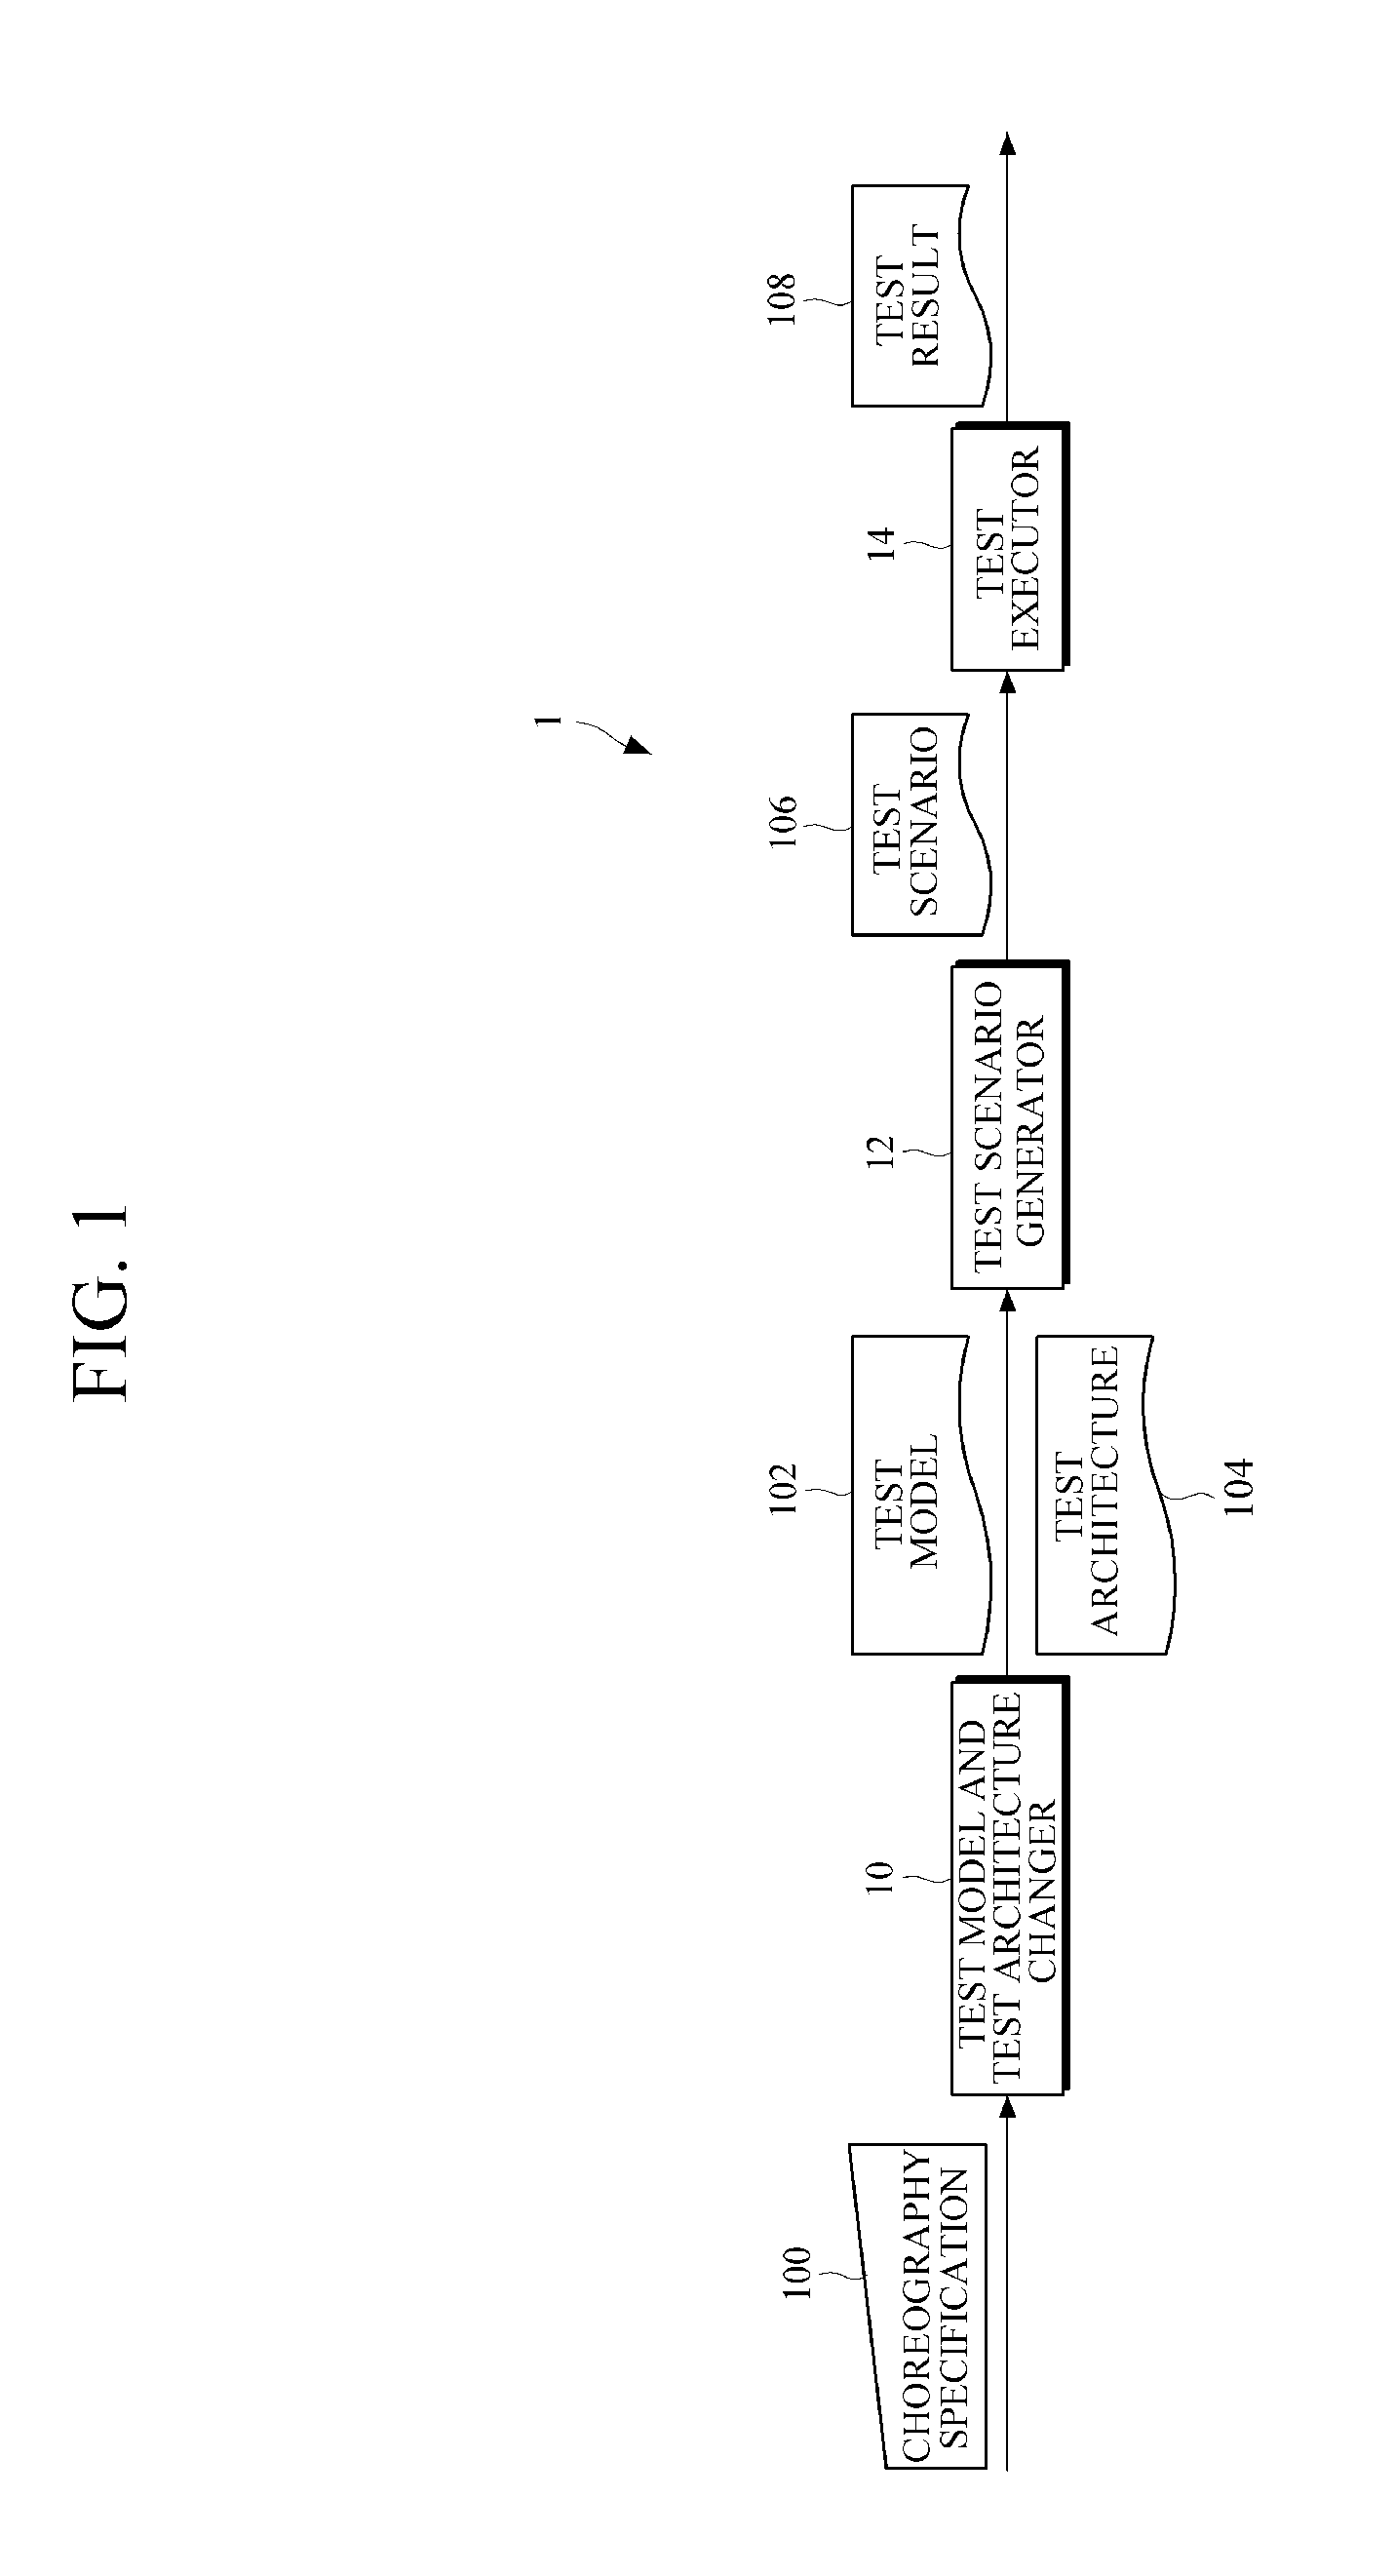 Apparatus and method for testing conformance of service choreography